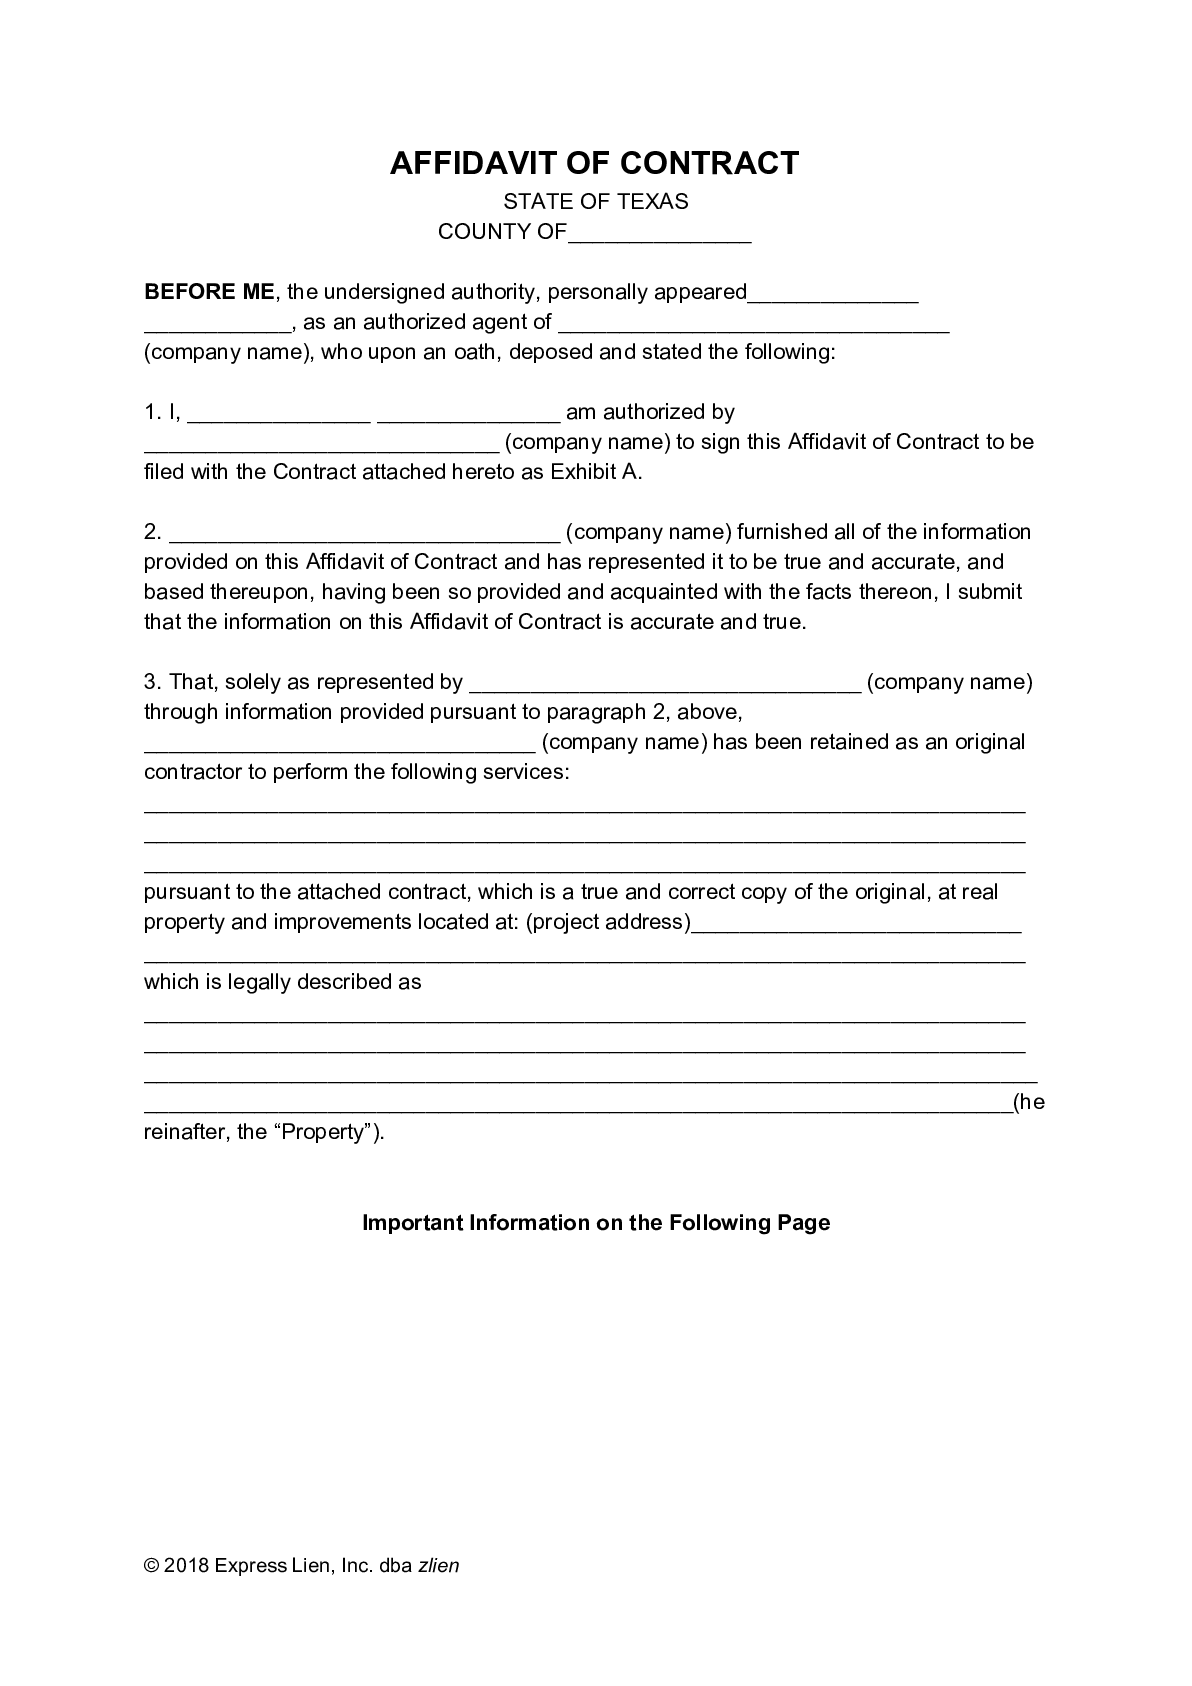 Texas Affidavit of Contract – Homestead Form - free from